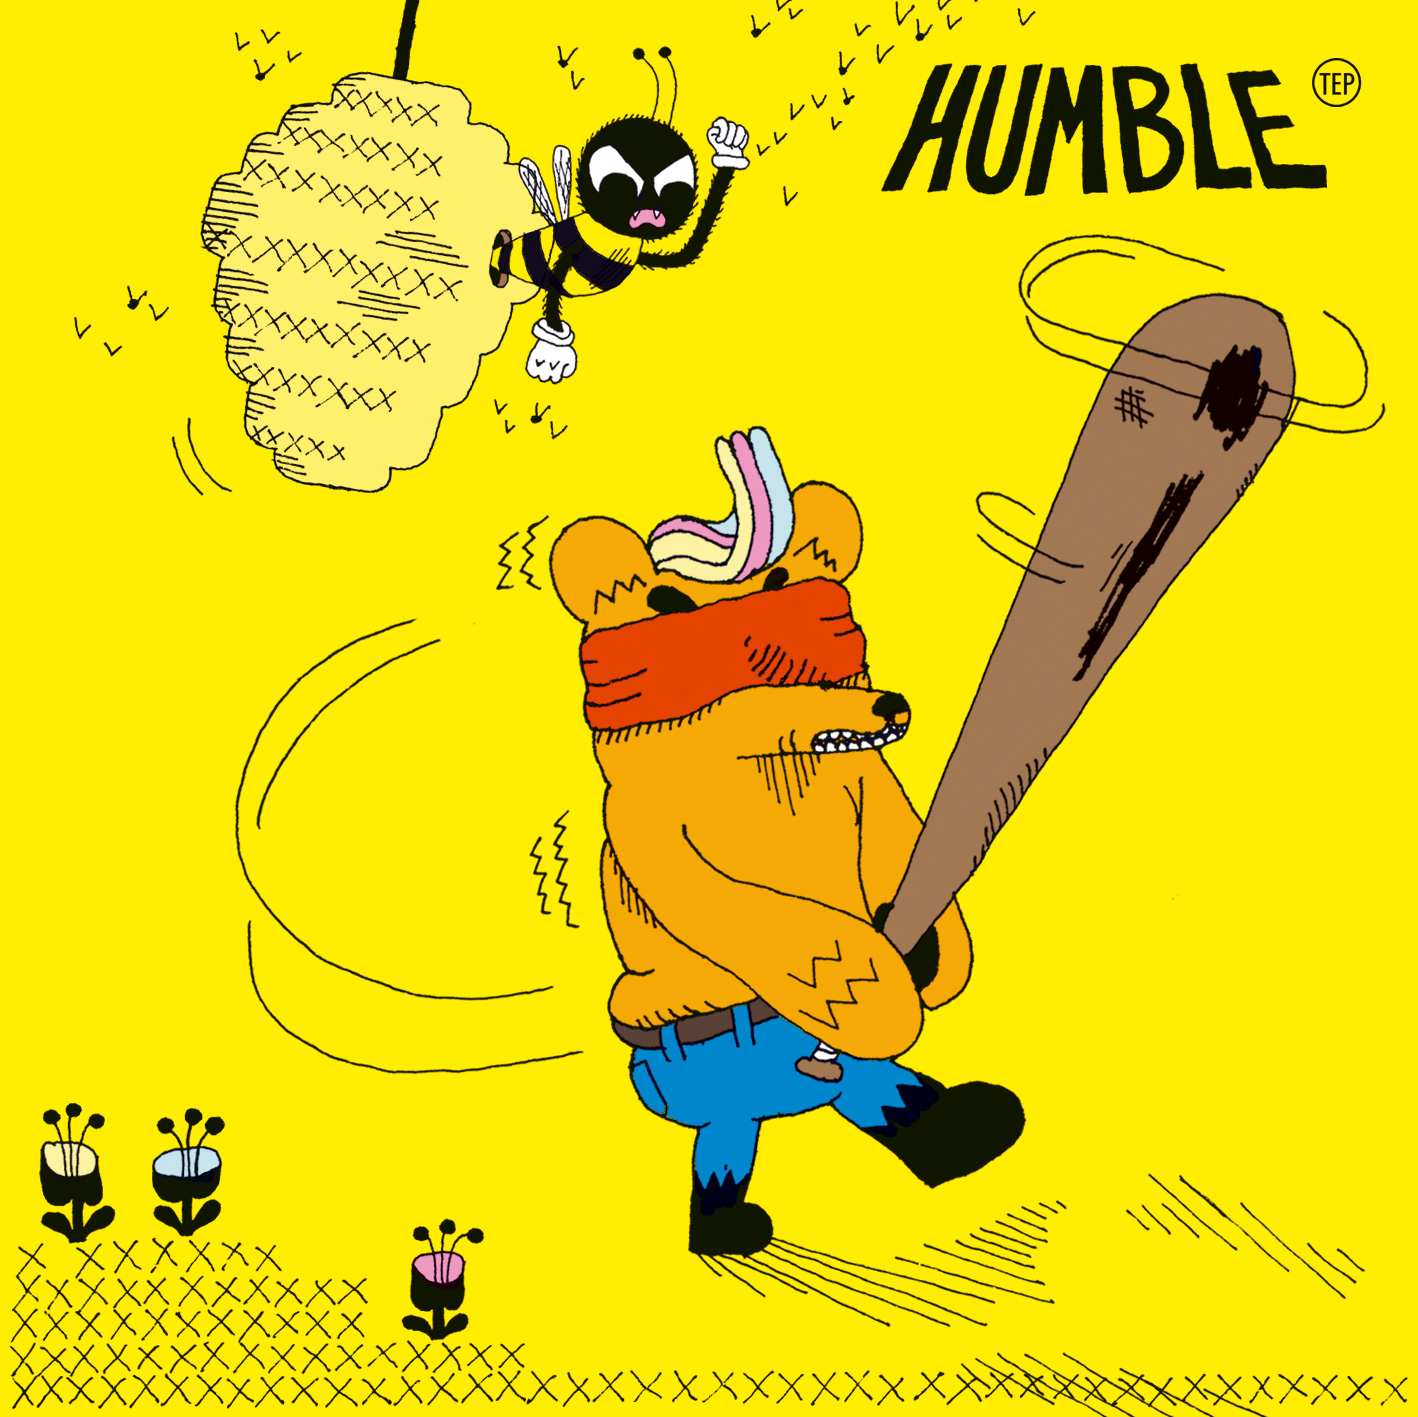 Humble cover